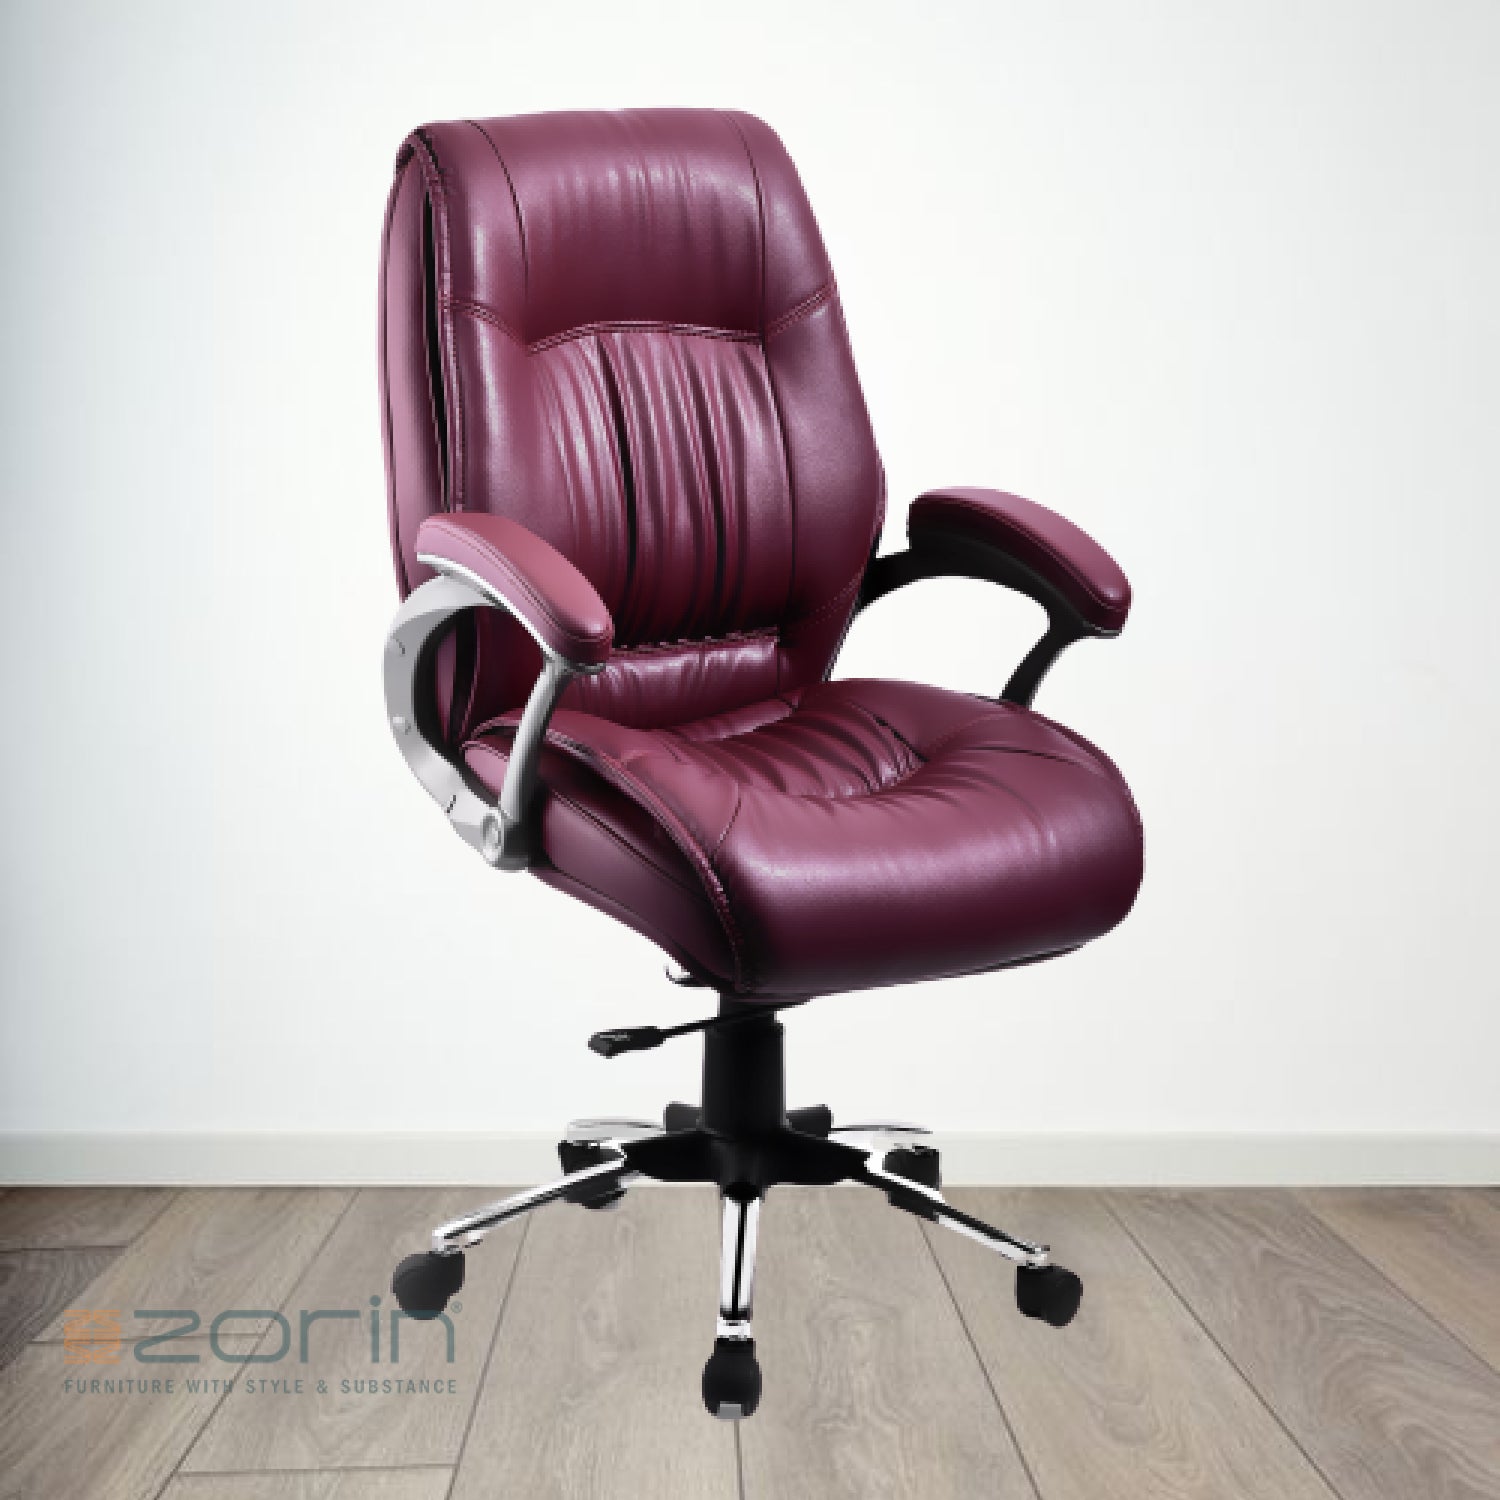 ZSE1039 Medium Back Chair by Zorin in Burgendy Color Zorin